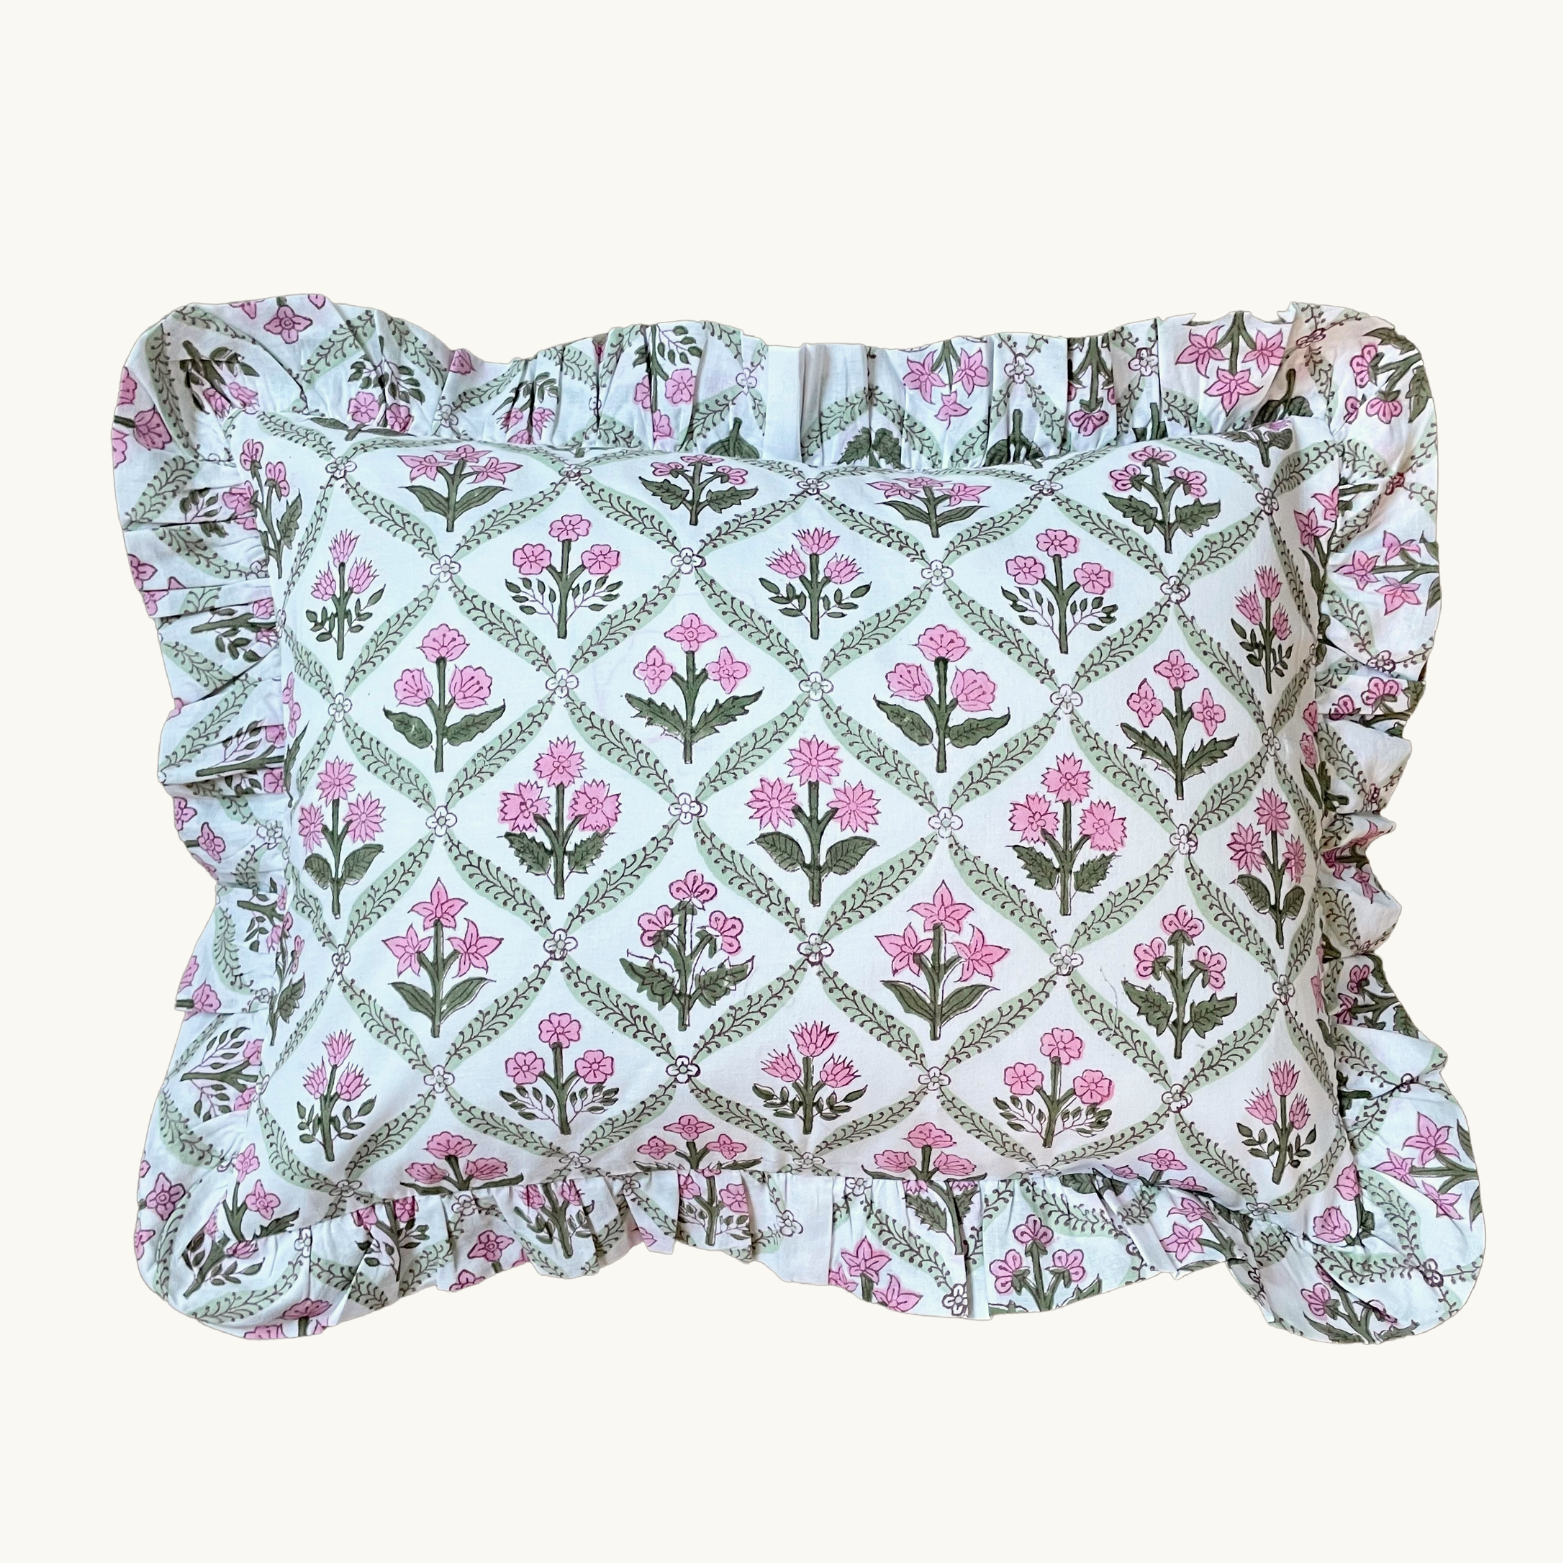 Pink and Green Trellis Frilled Cushion